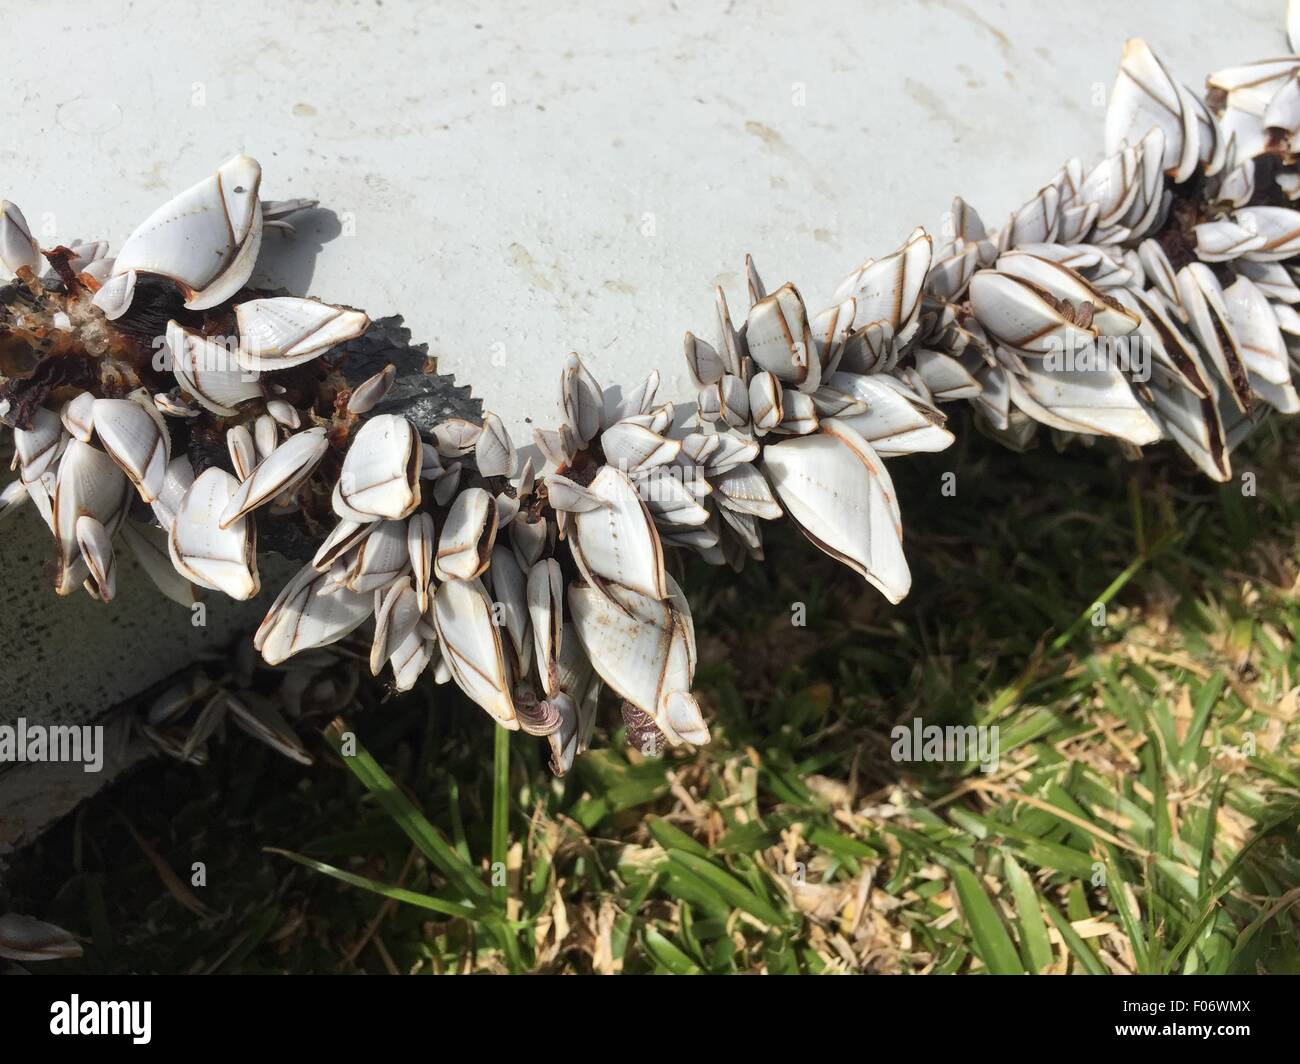 Beijing, China. 29th July, 2015. Photo taken on July 29, 2015 shows shells growing on a piece of debris on the Reunion Island. Verification has confirmed that the debris discovered on the Reunion Island belonged to missing Malaysian Airlines flight MH370. © Romain Latournerie/Xinhua/Alamy Live News Stock Photo